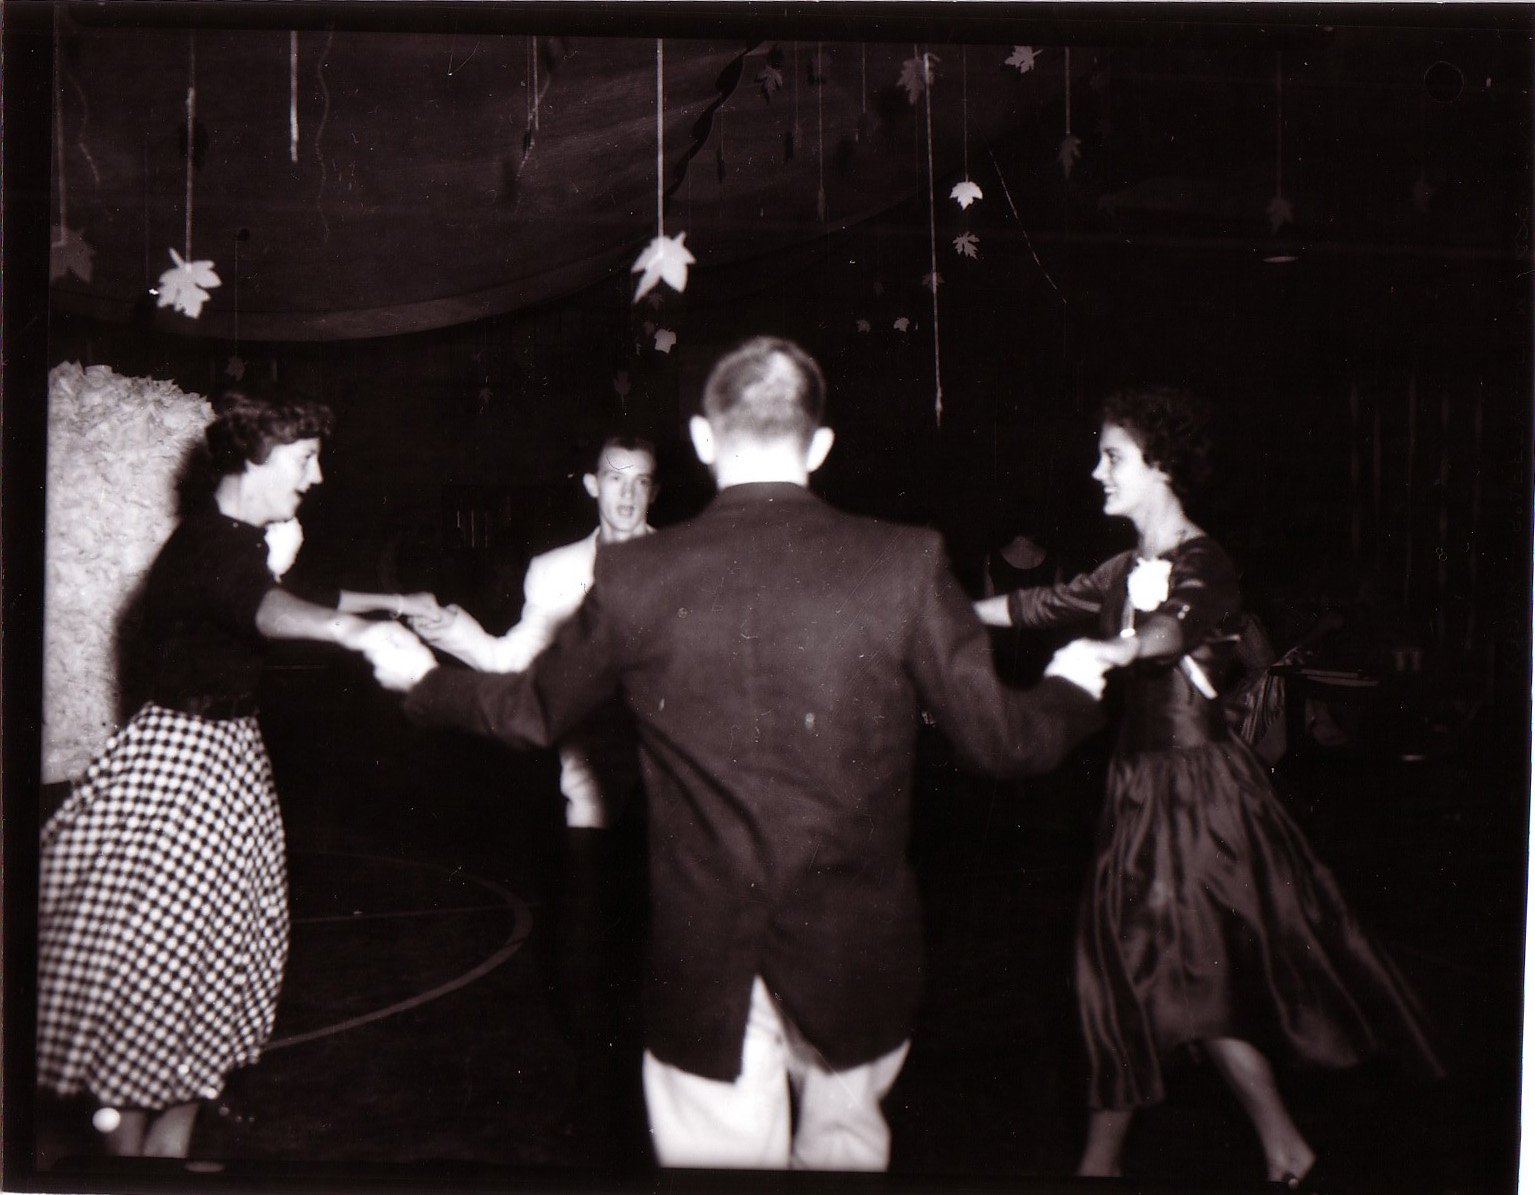 DANCING AT THE HOMECOMING EVENT - 1956